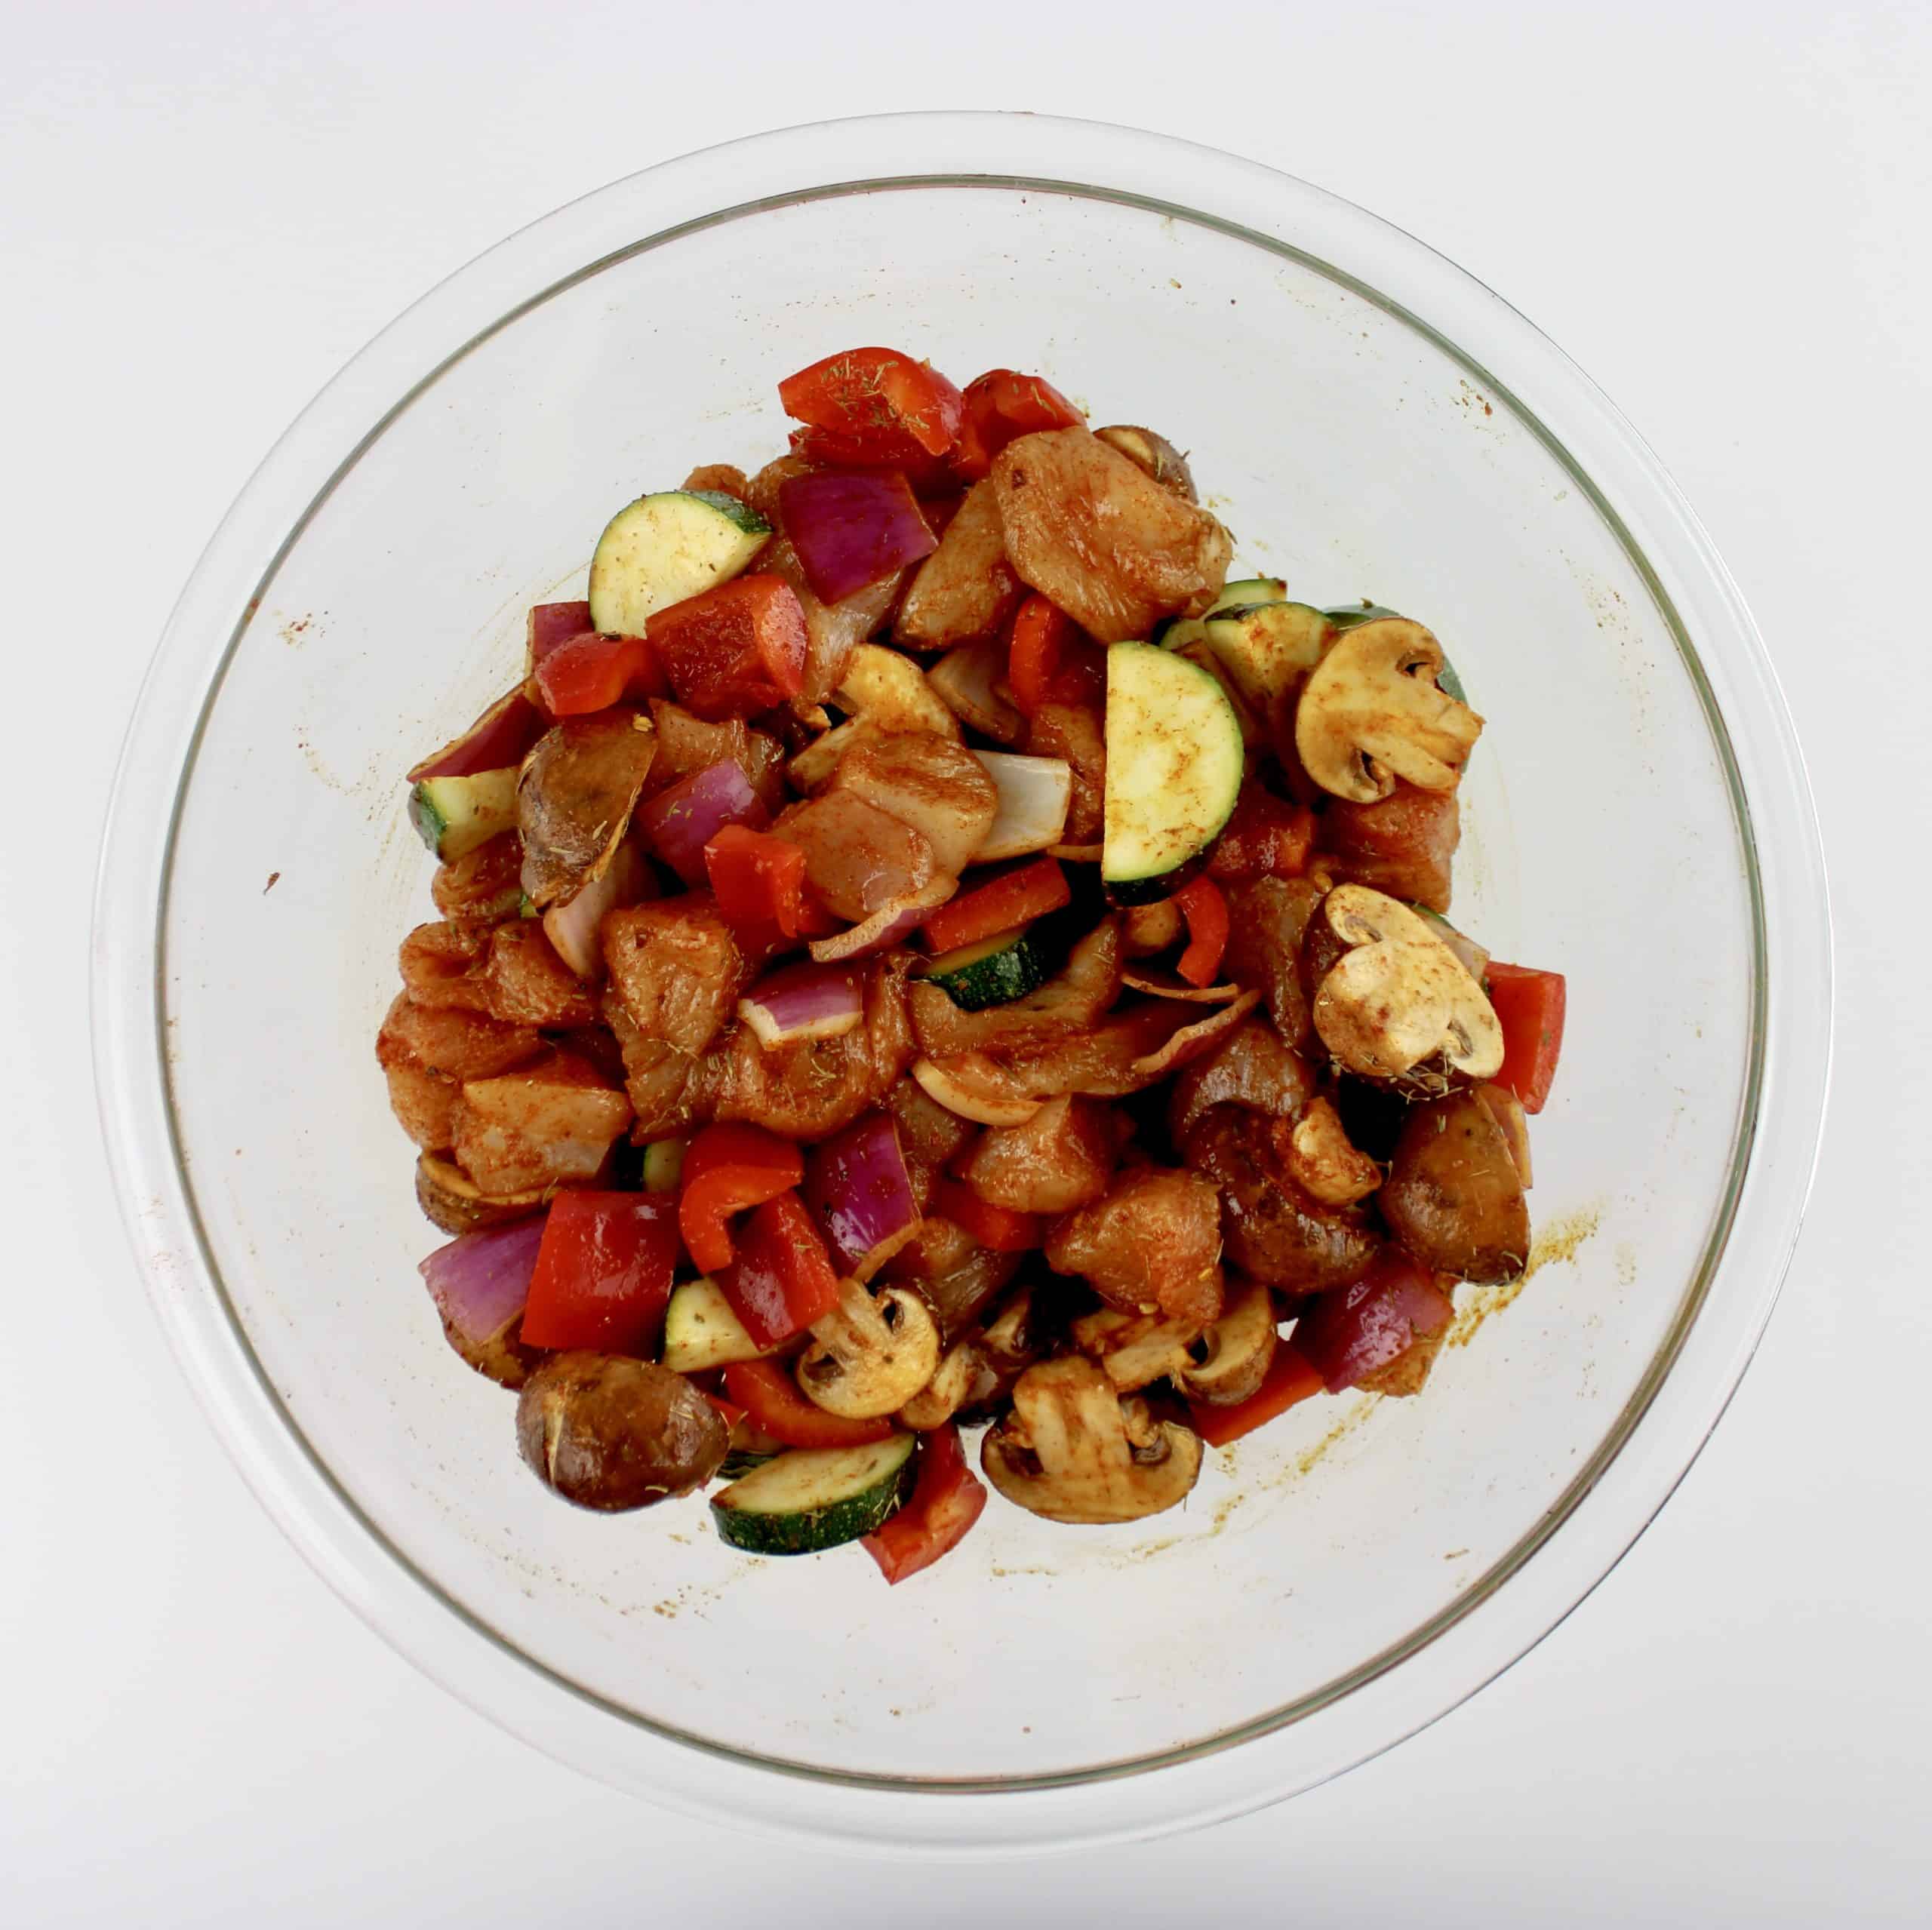 chopped chicken zucchini red onion mushrooms and red pepper in glass bowl with spices and herbs